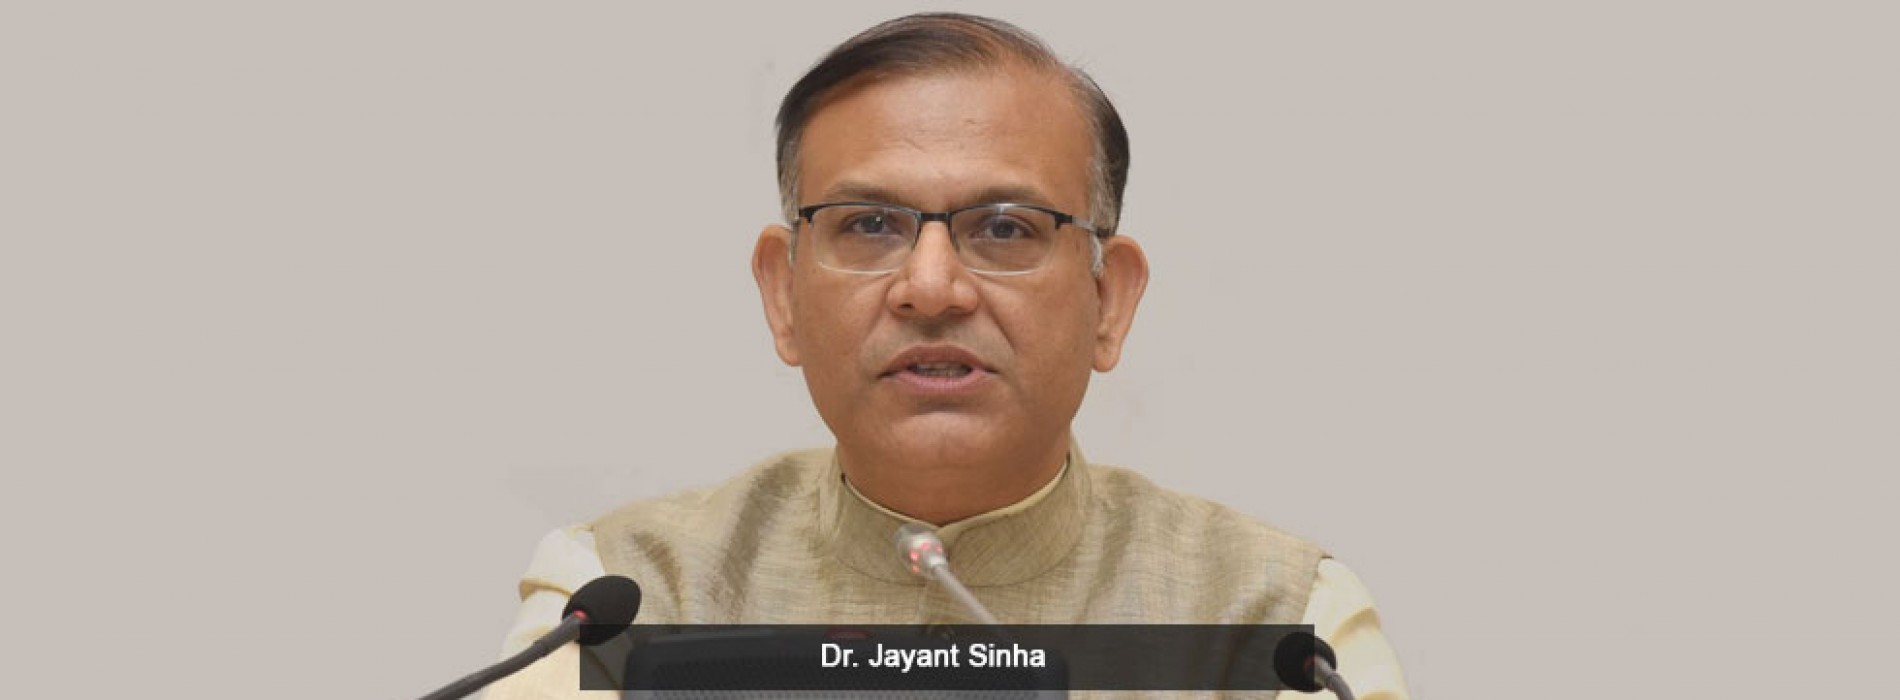 Dr Jayant Sinha becomes the new MoS of Civil Aviation